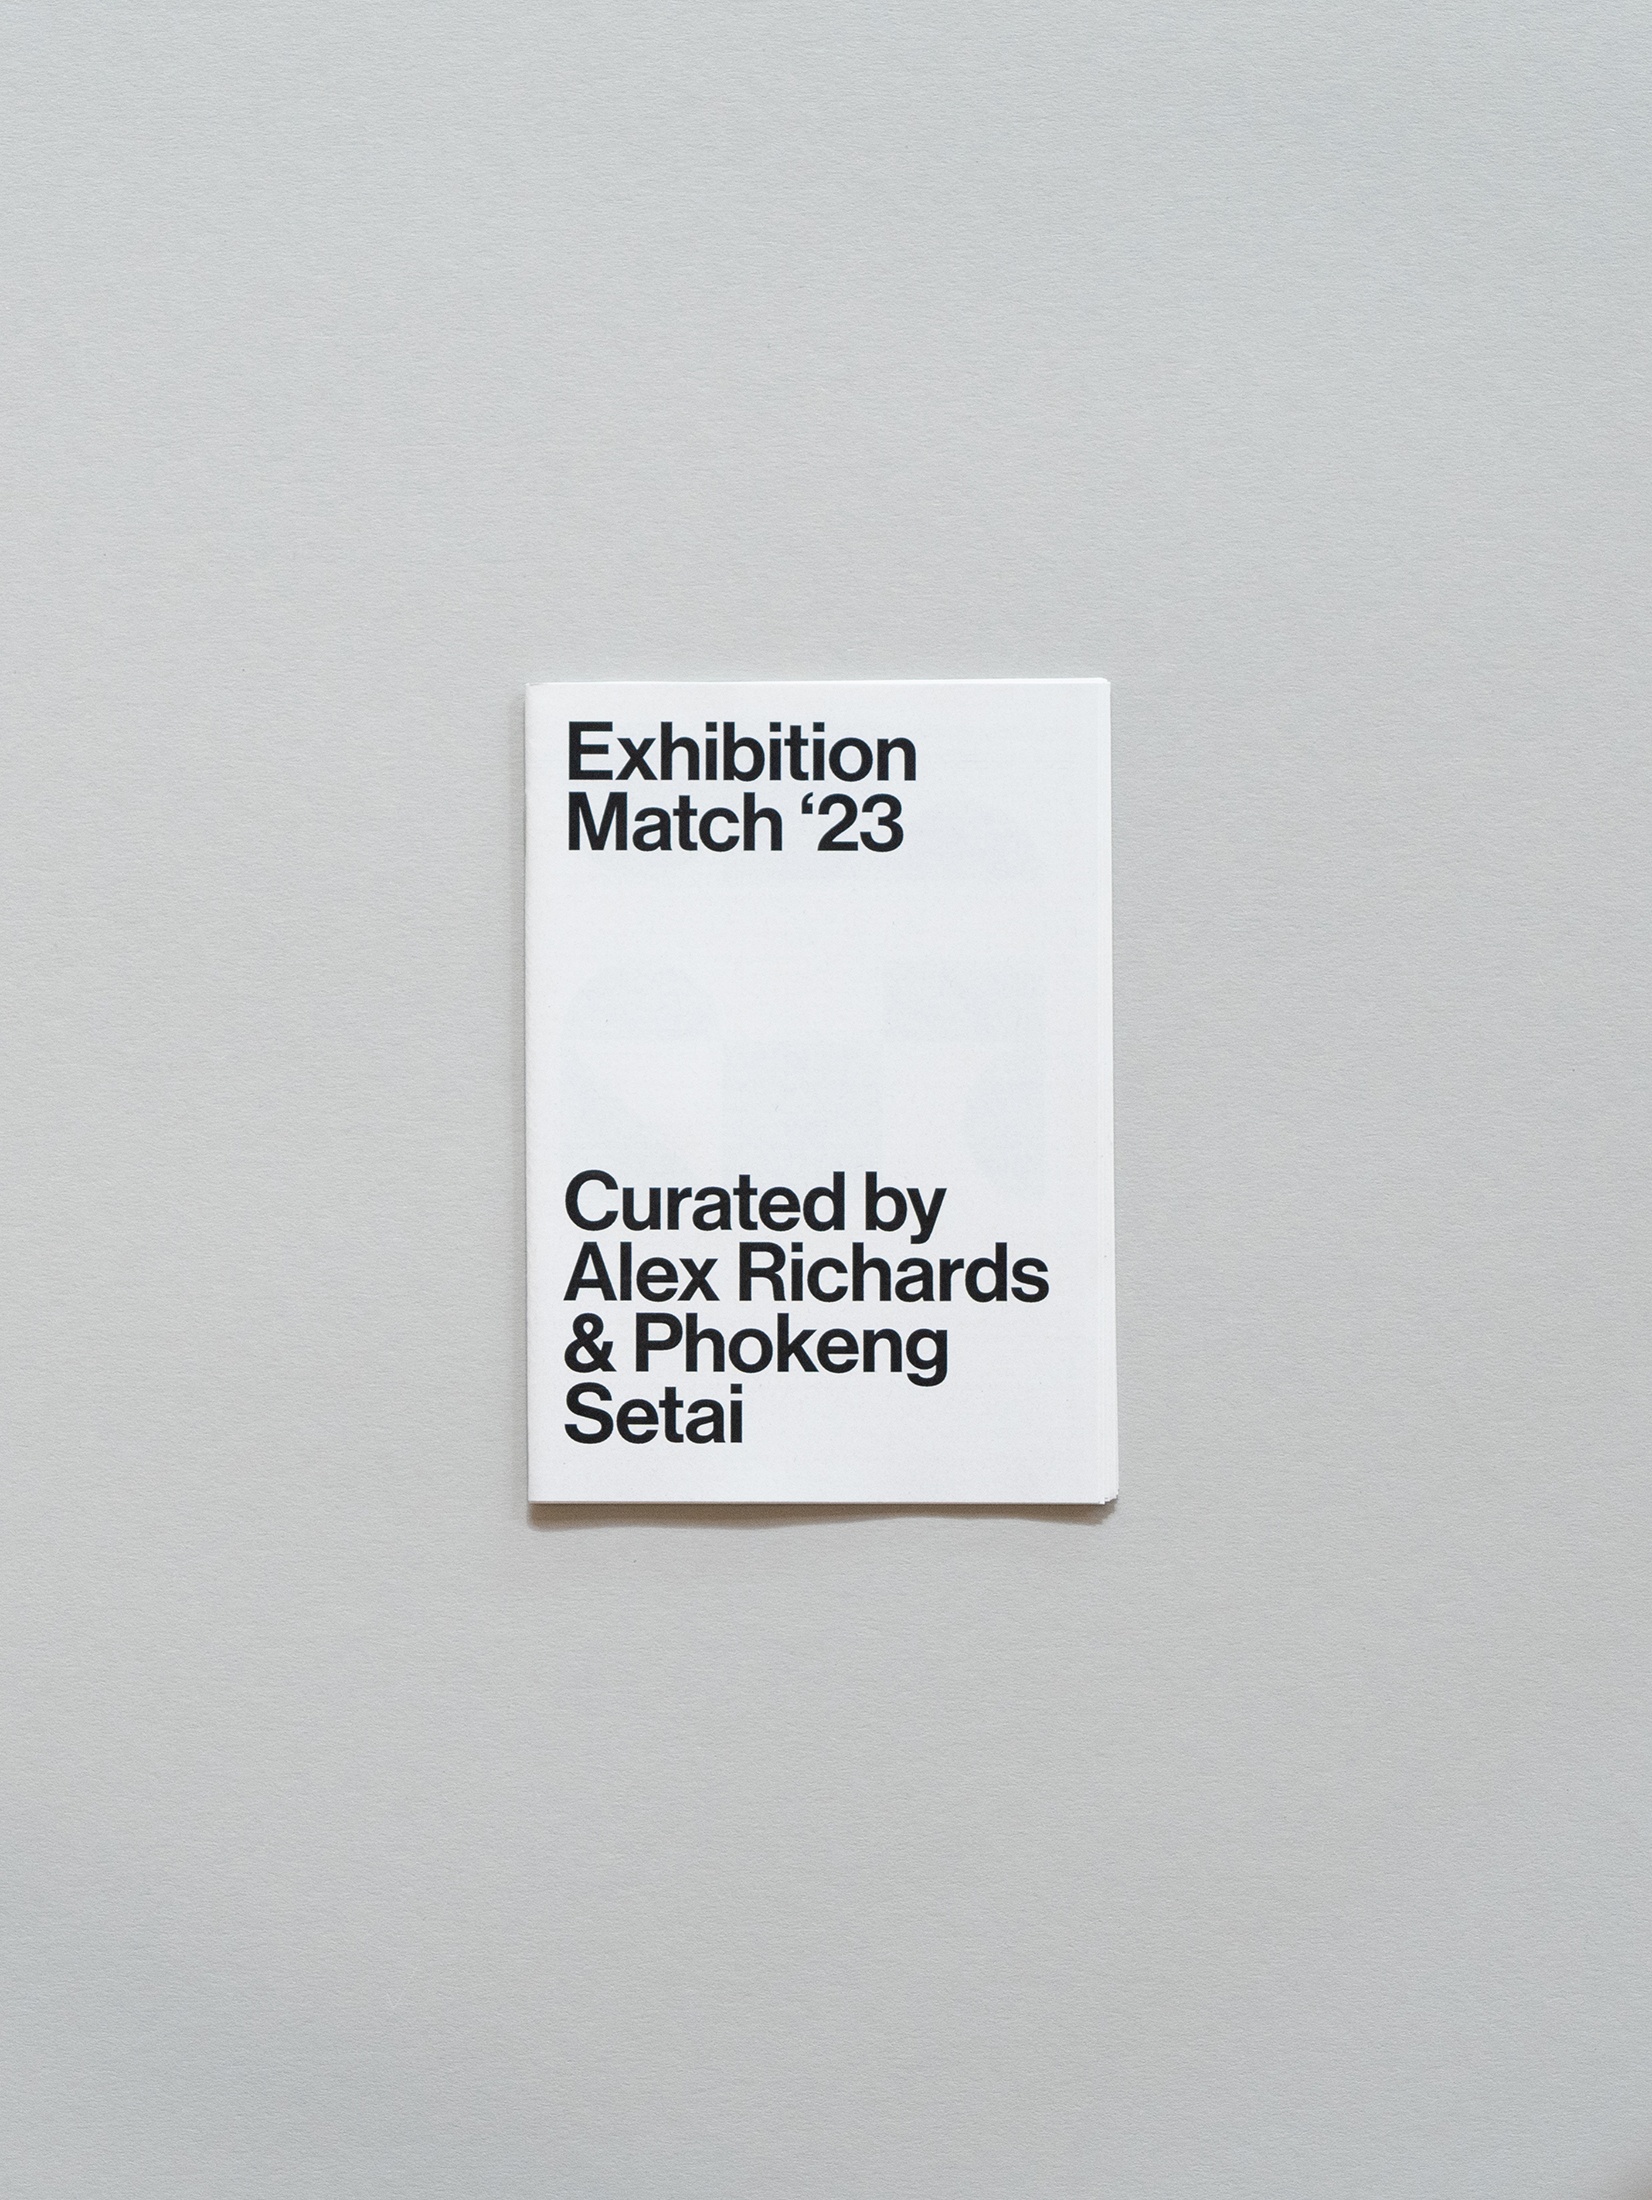 Photograph of the wayfinder publication for Exhibition Match ICTAF '23, curated by Alexander Richards and Phokeng Tshepo Setai at Fives Futbol, Grand Central Shopping Centre.
